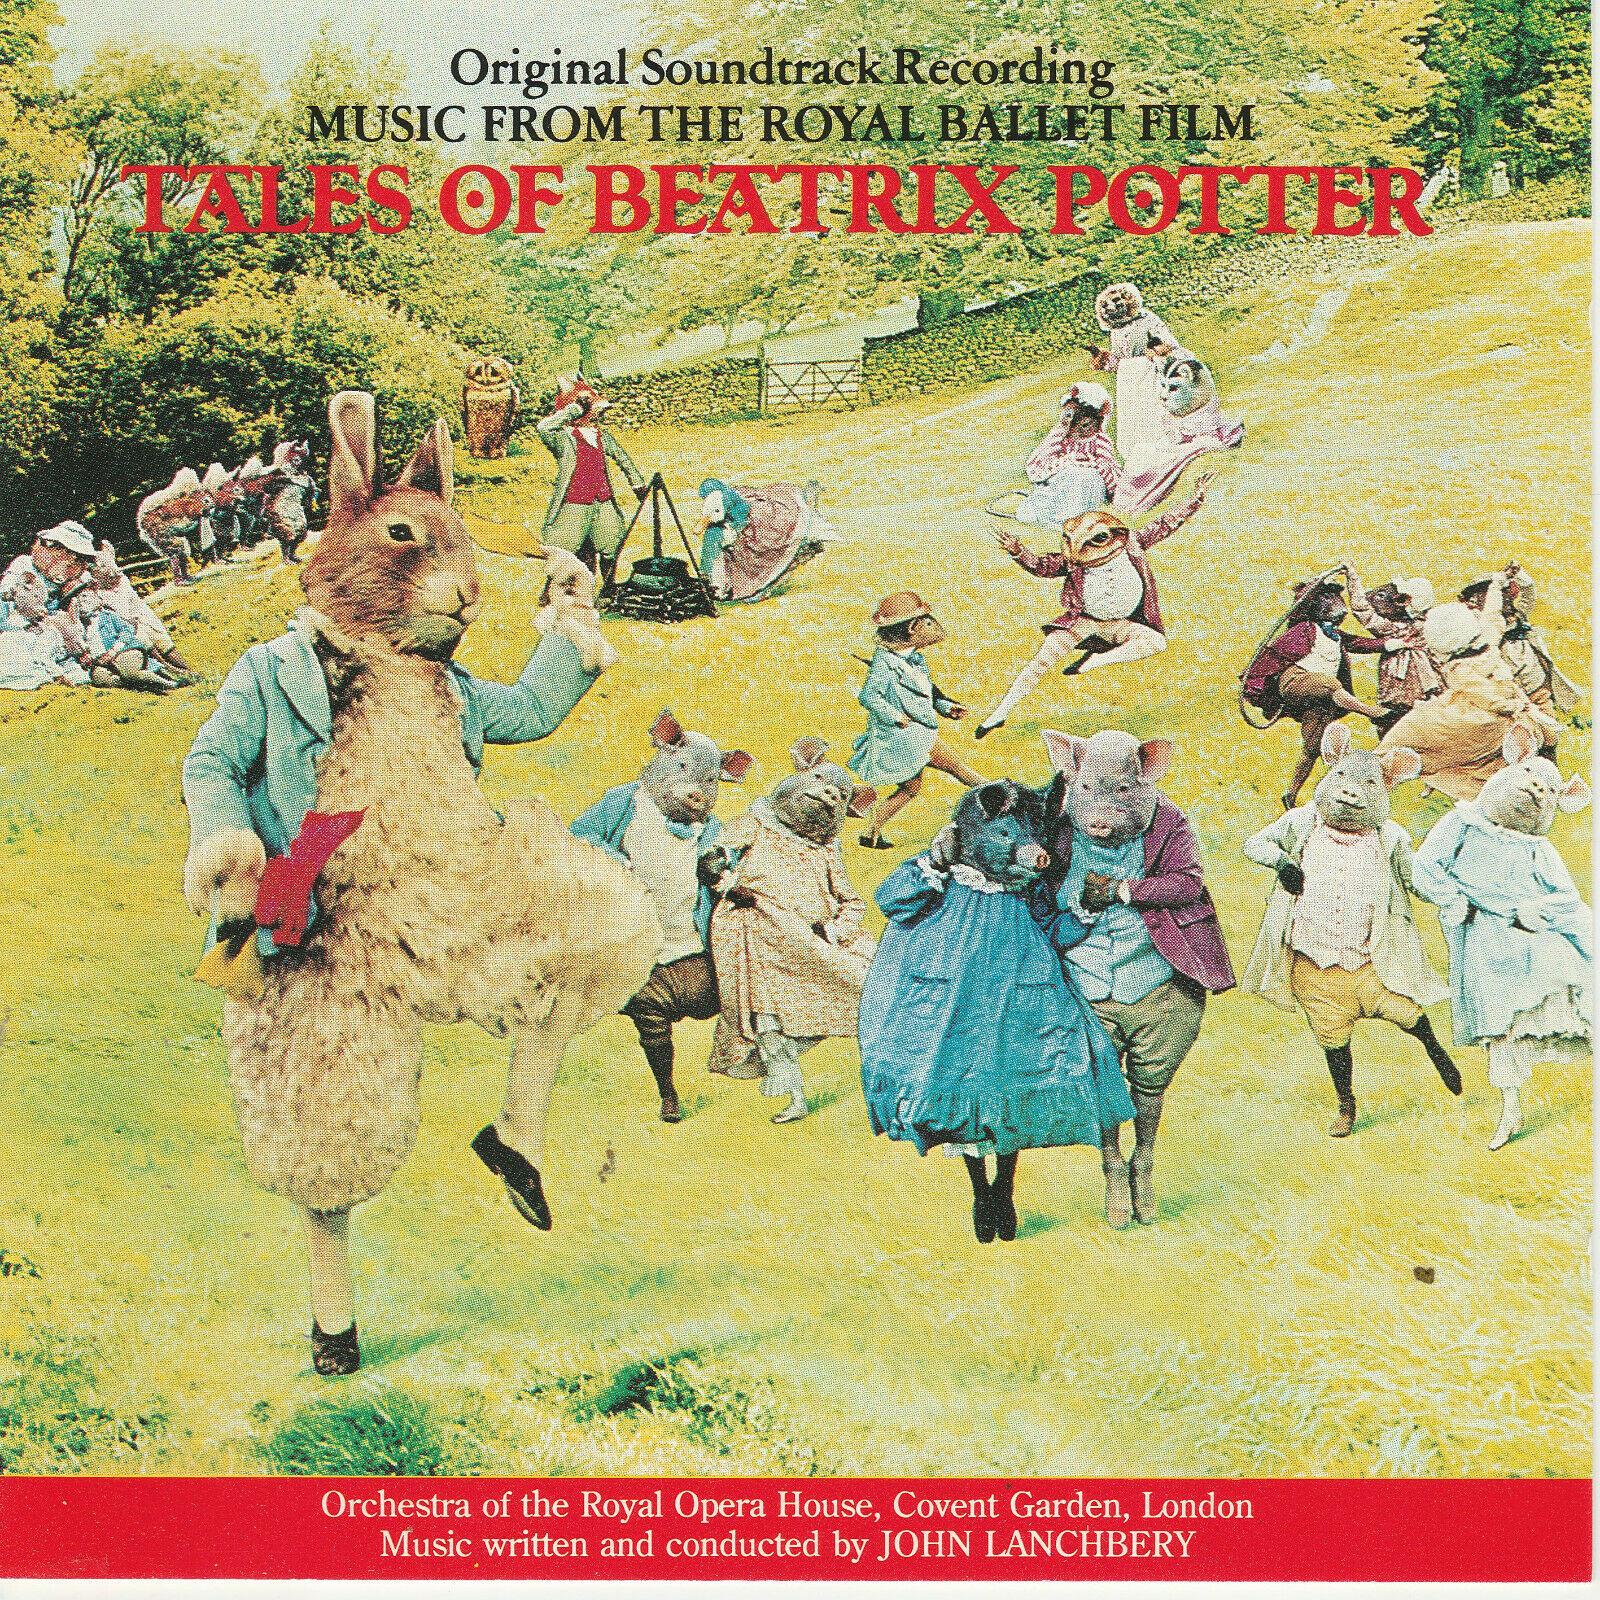 Music From The Royal Ballet Film Tales Of Beatrix Potter (Original Soundtrack Recording)